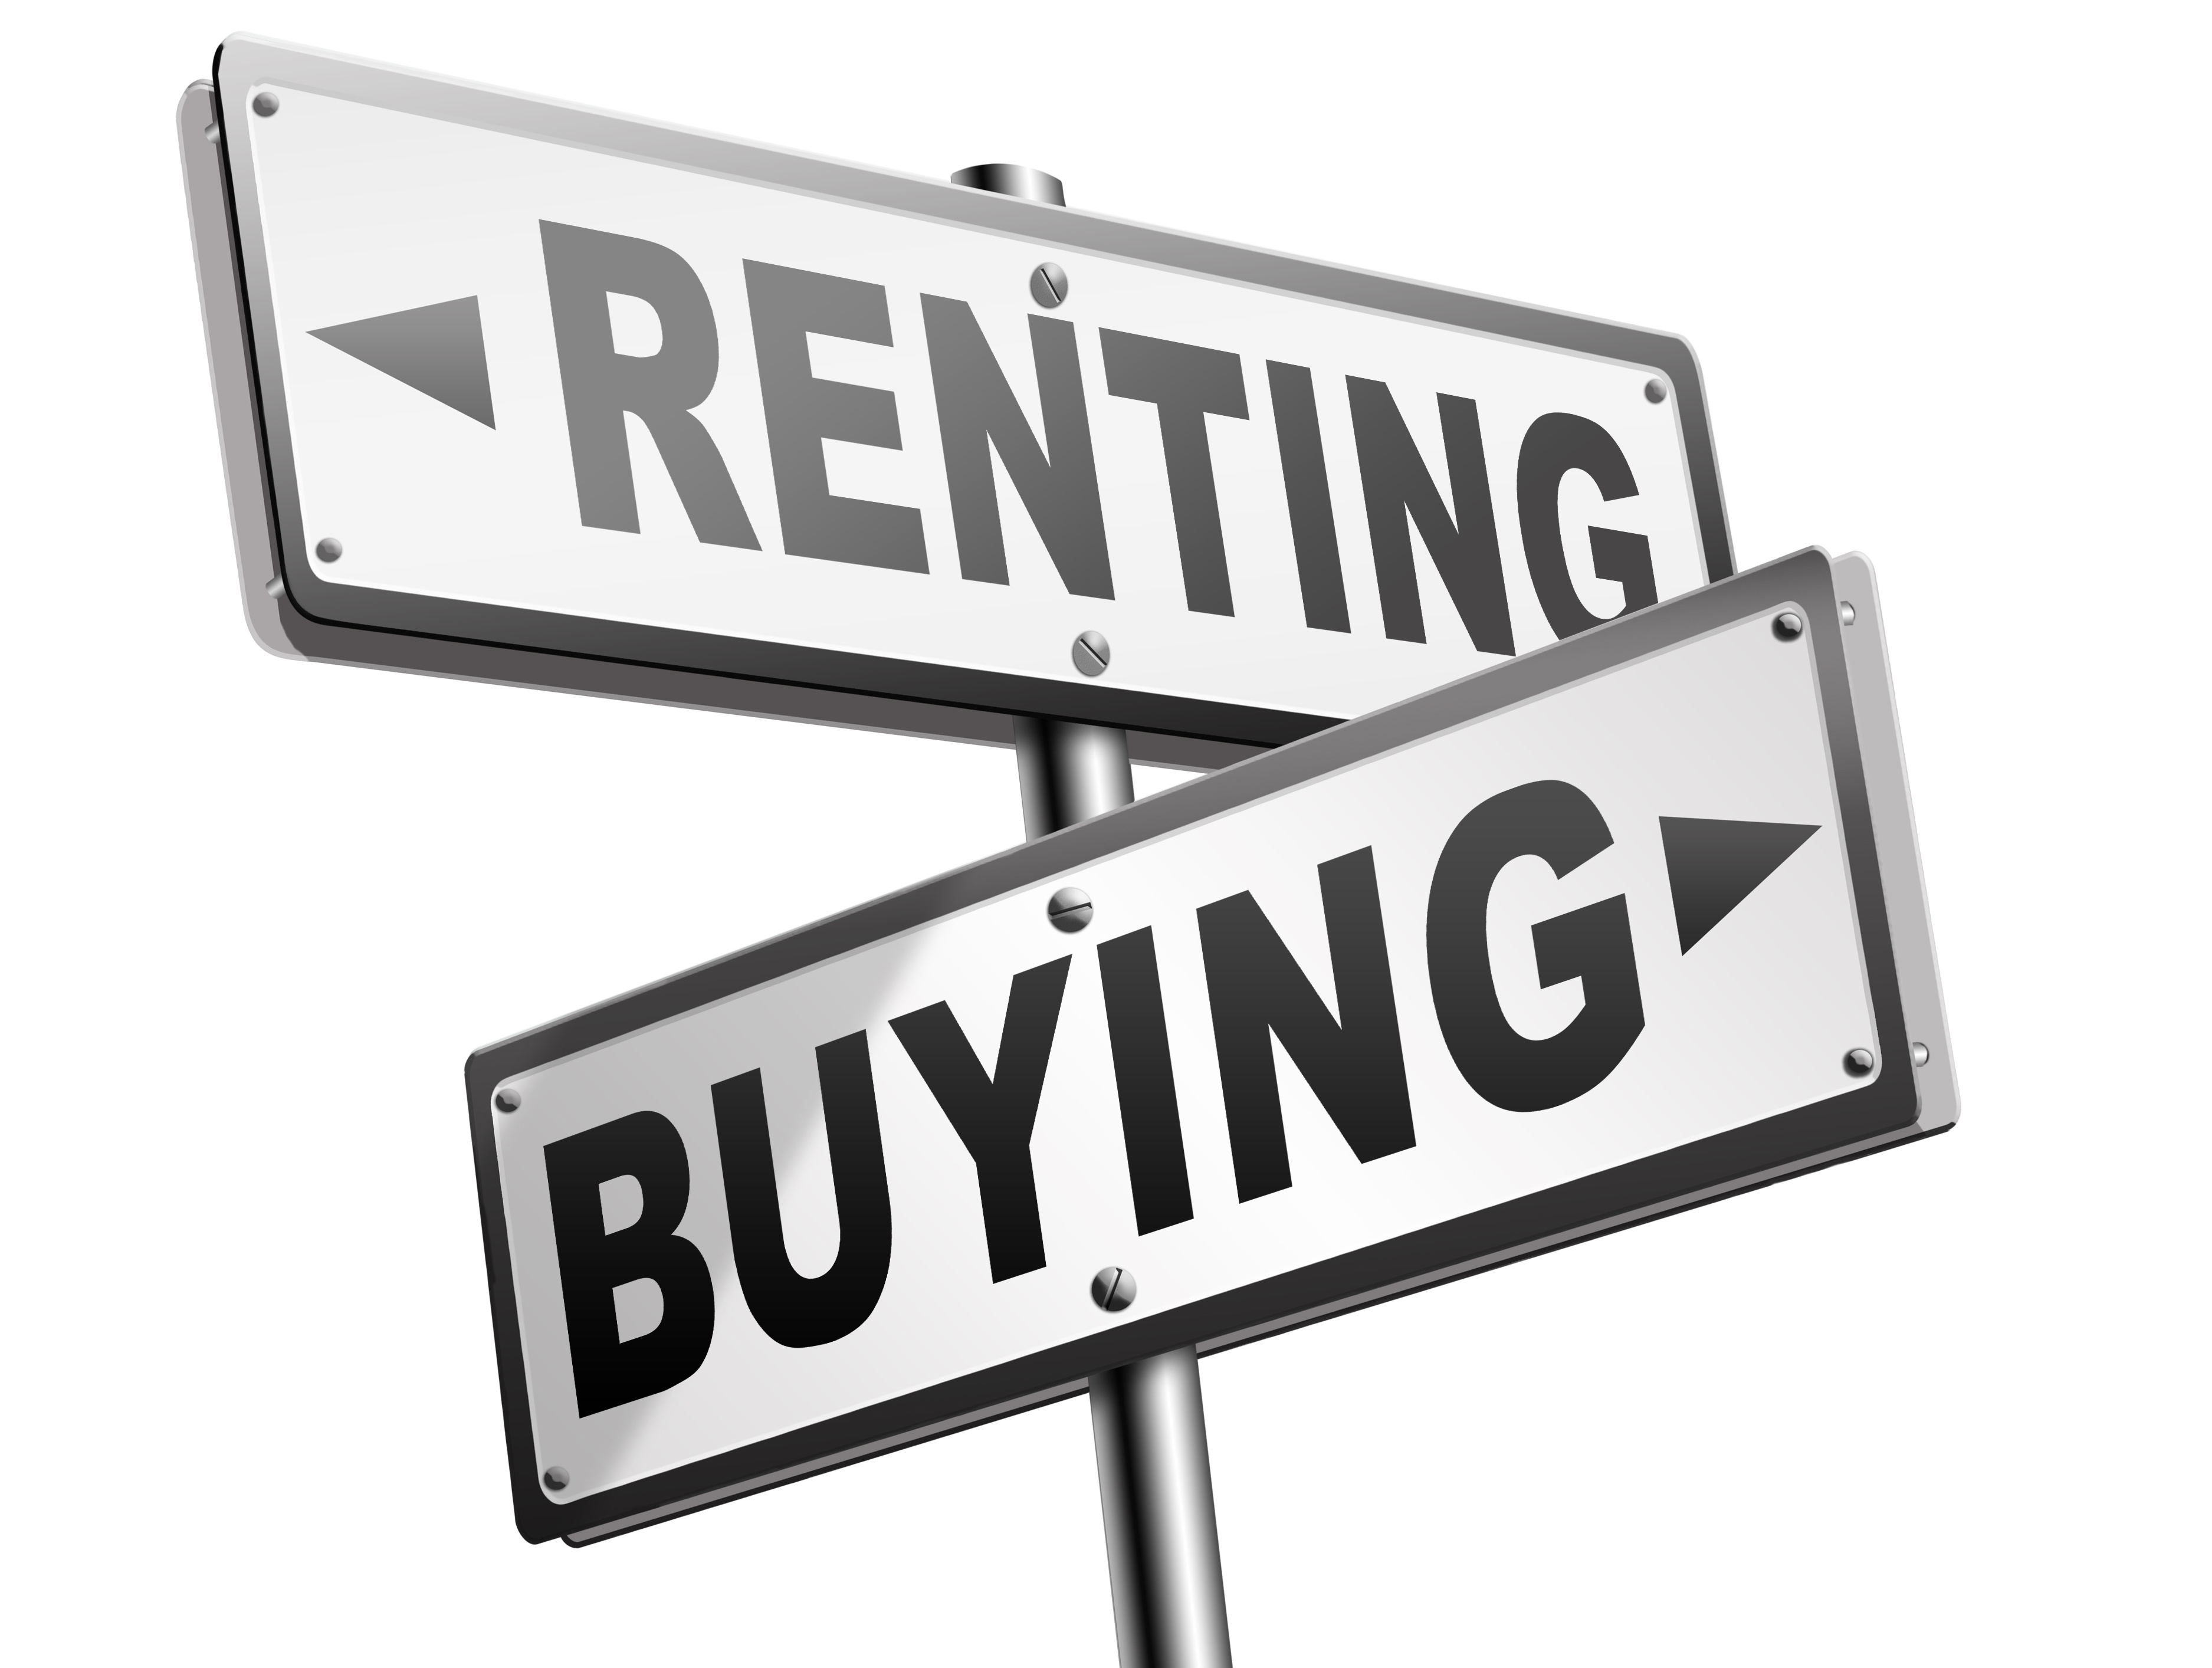 Average tenant expects to rent for ten more years